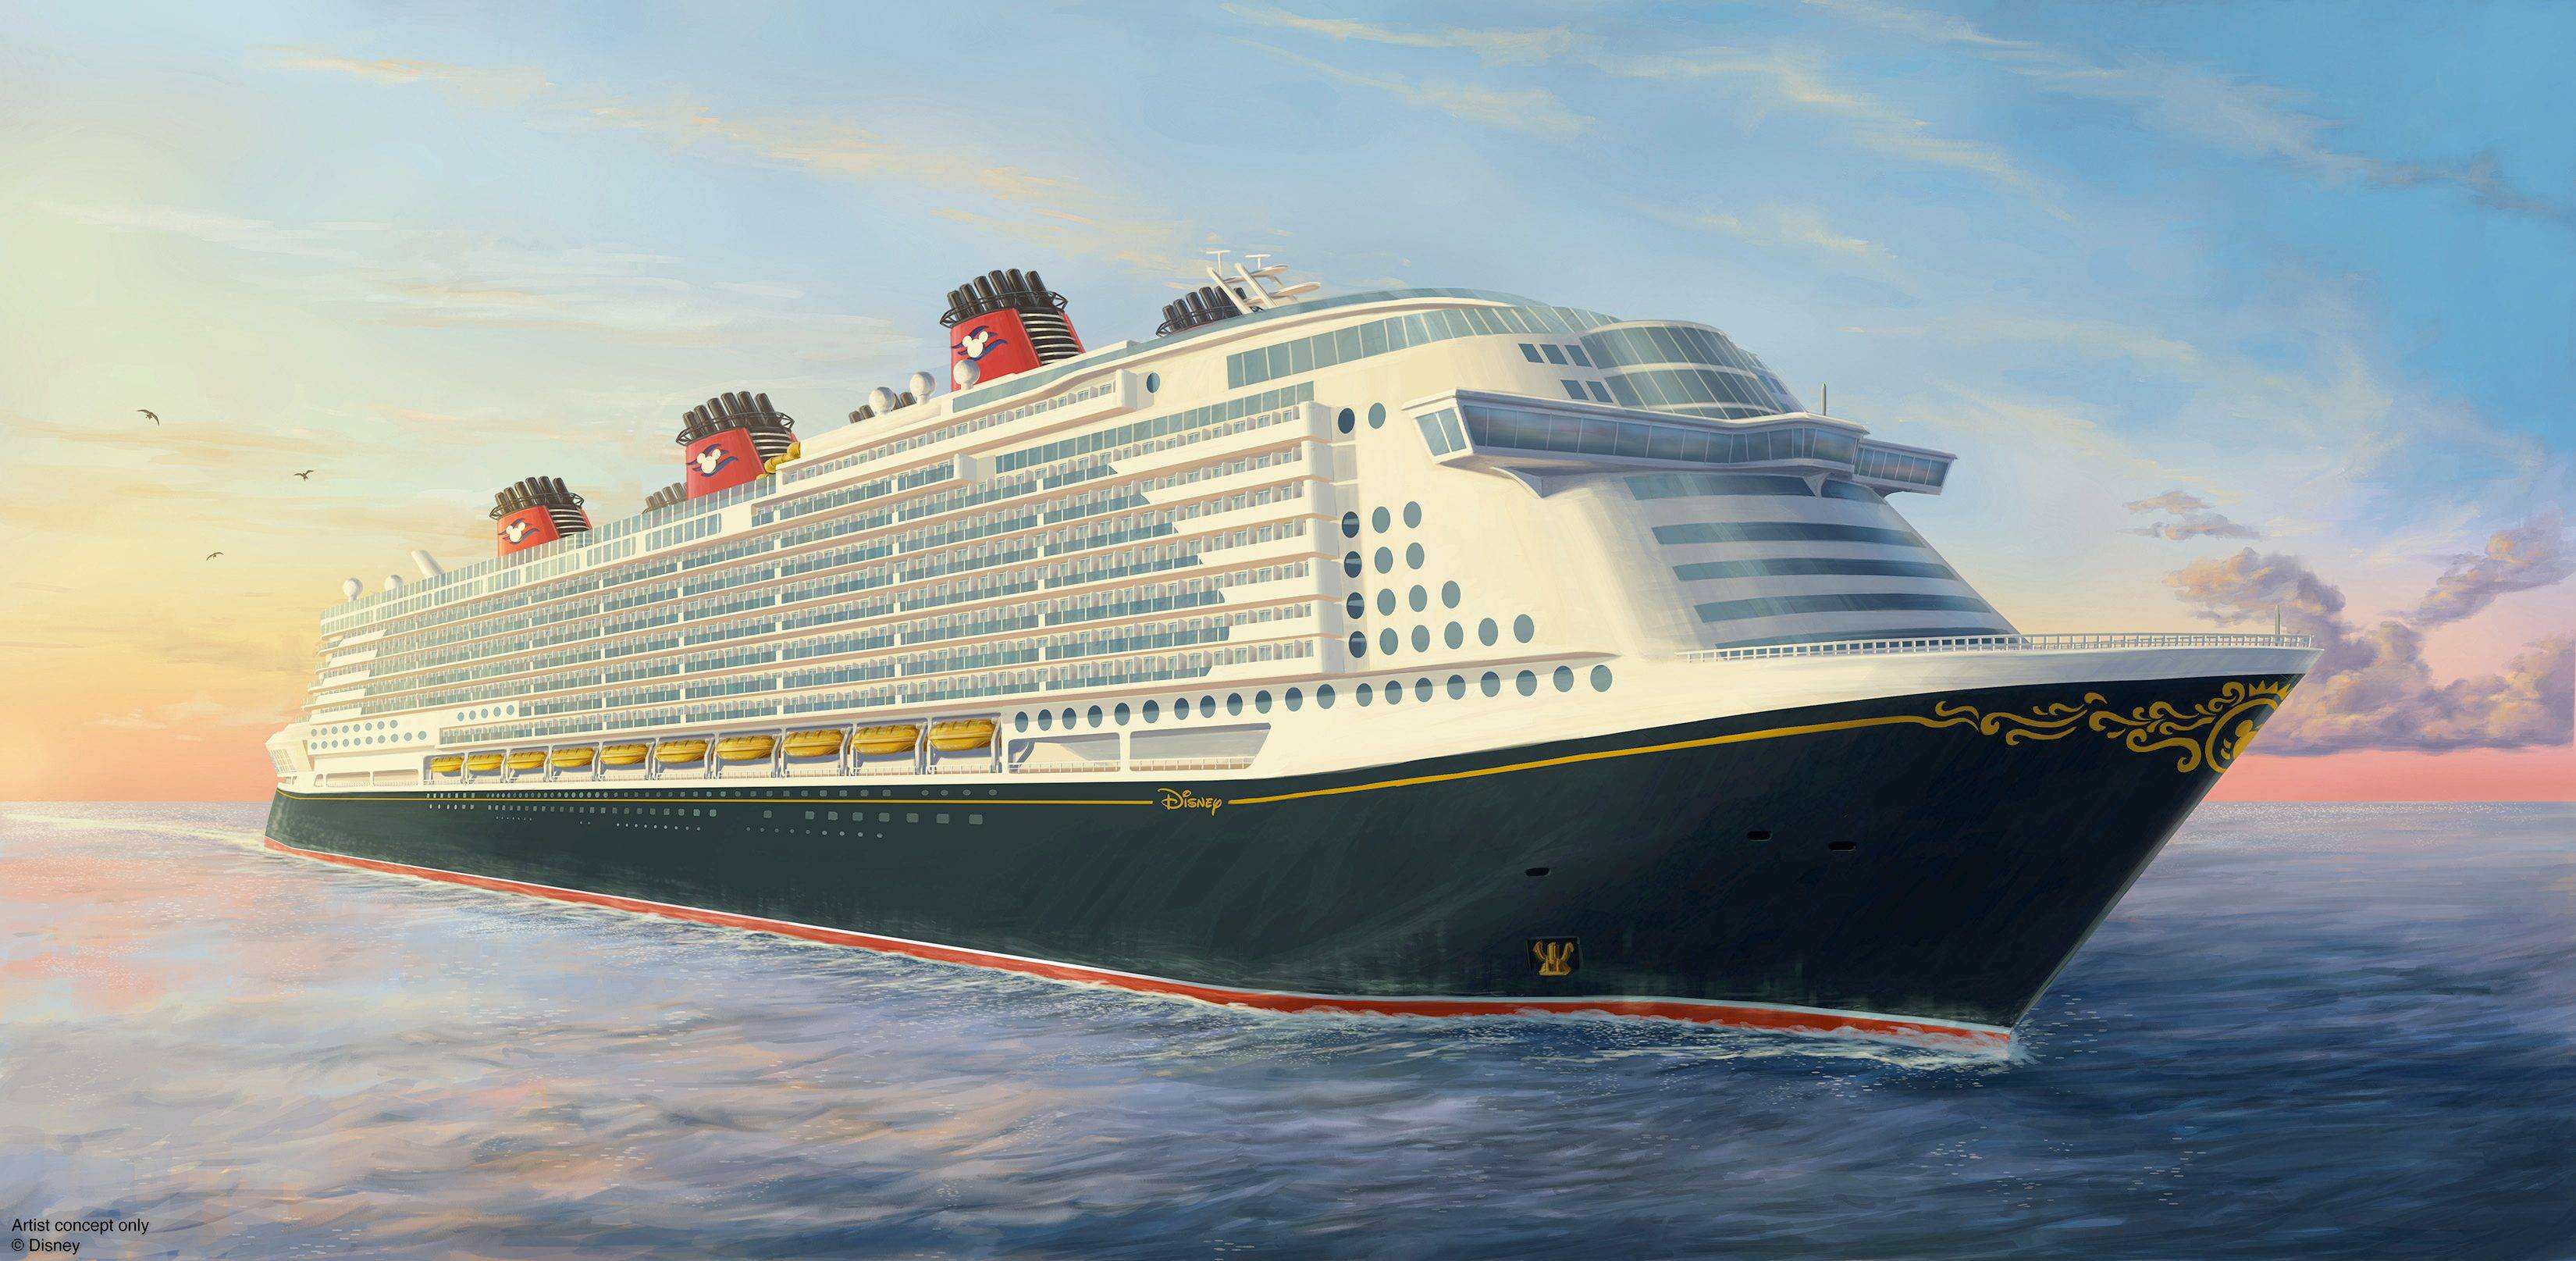 Disney Cruise Line's recently acquired mega-ship will be based in Singapore